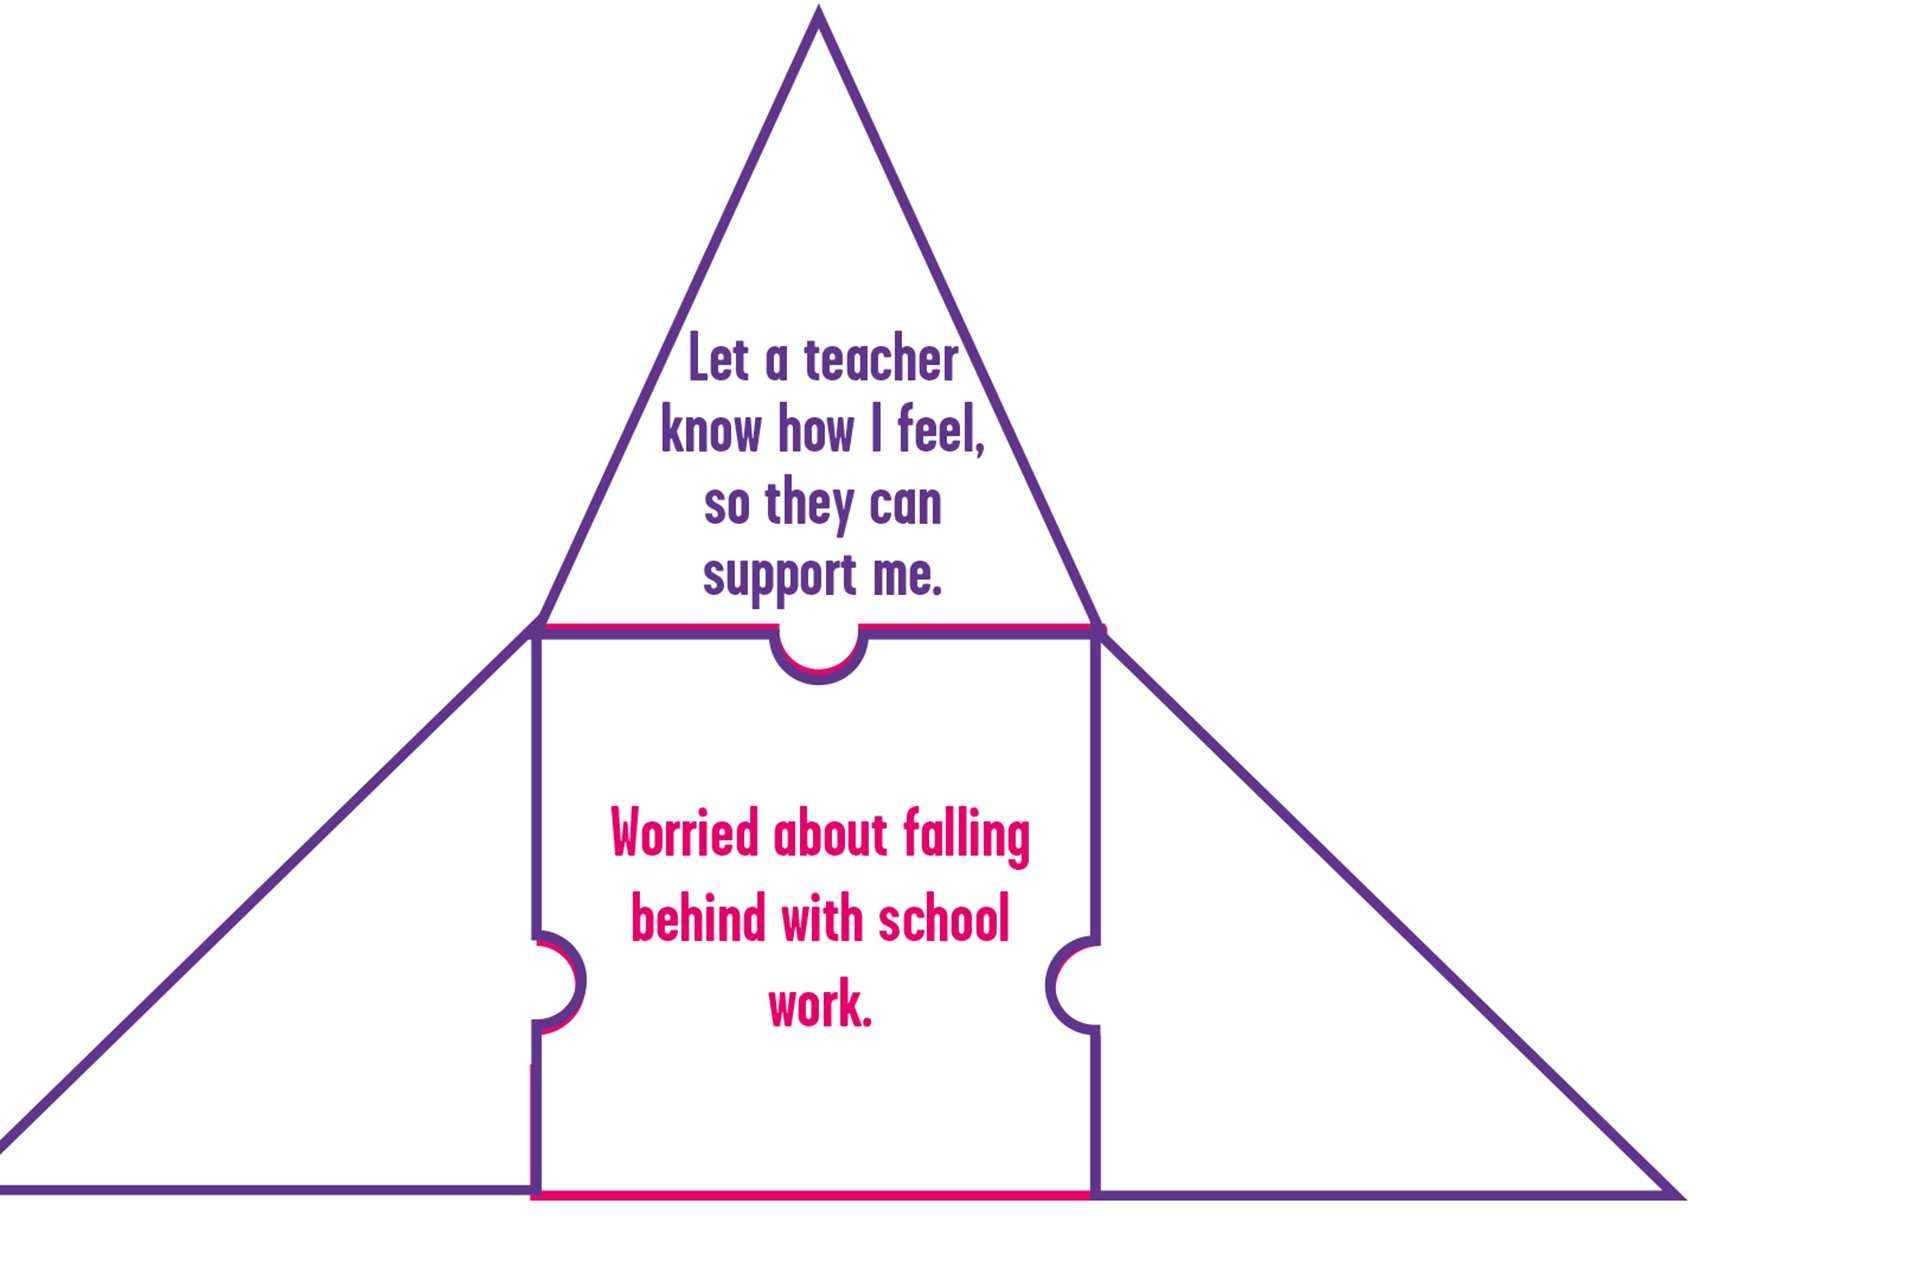 An image of our My Strategies activity. In the middle is a white square with a pink outline. Above, to the left and right are triangles with a purple outline. The triangles fold over the square when cut out to create a pyramid.